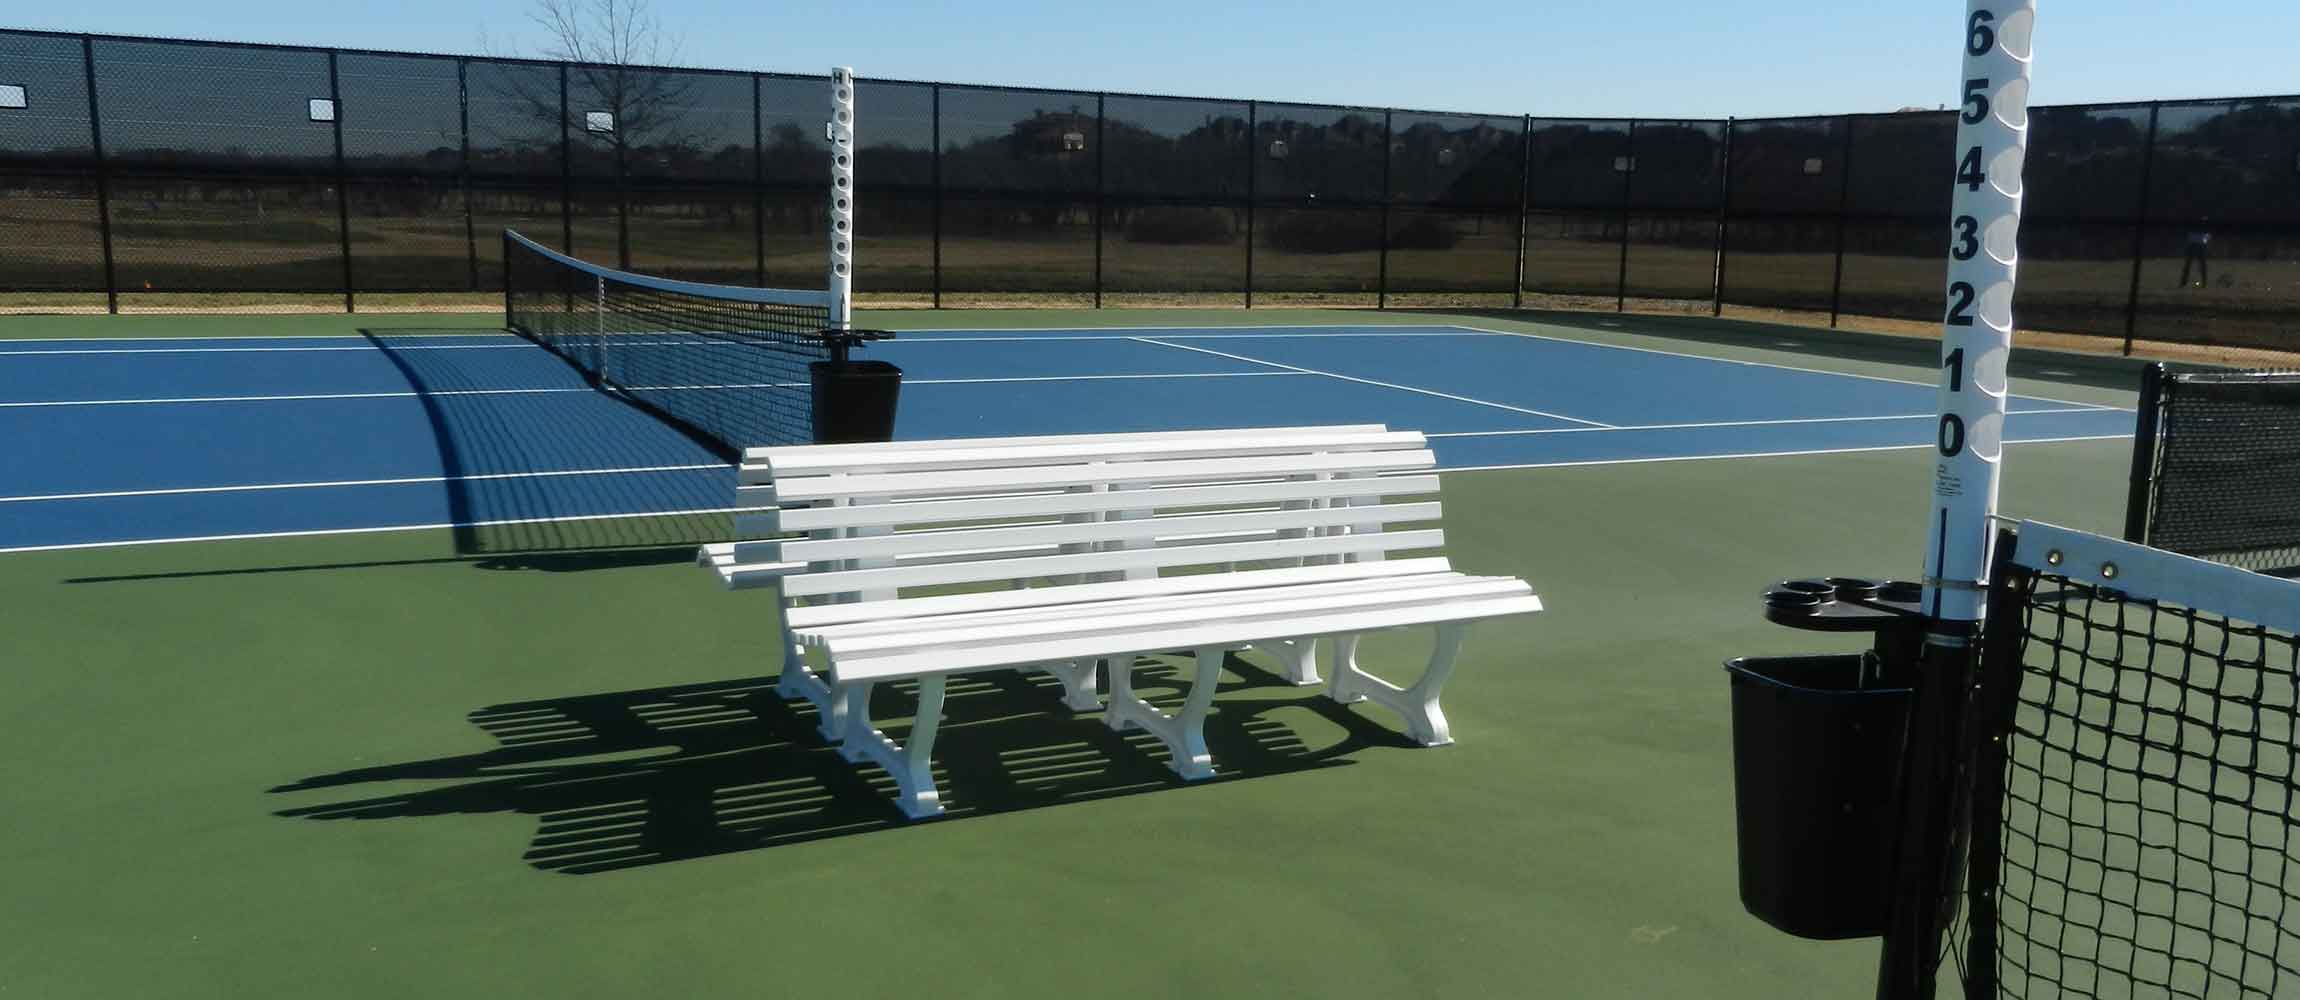 Master Systems Courts Tennis Court Accessories Slide